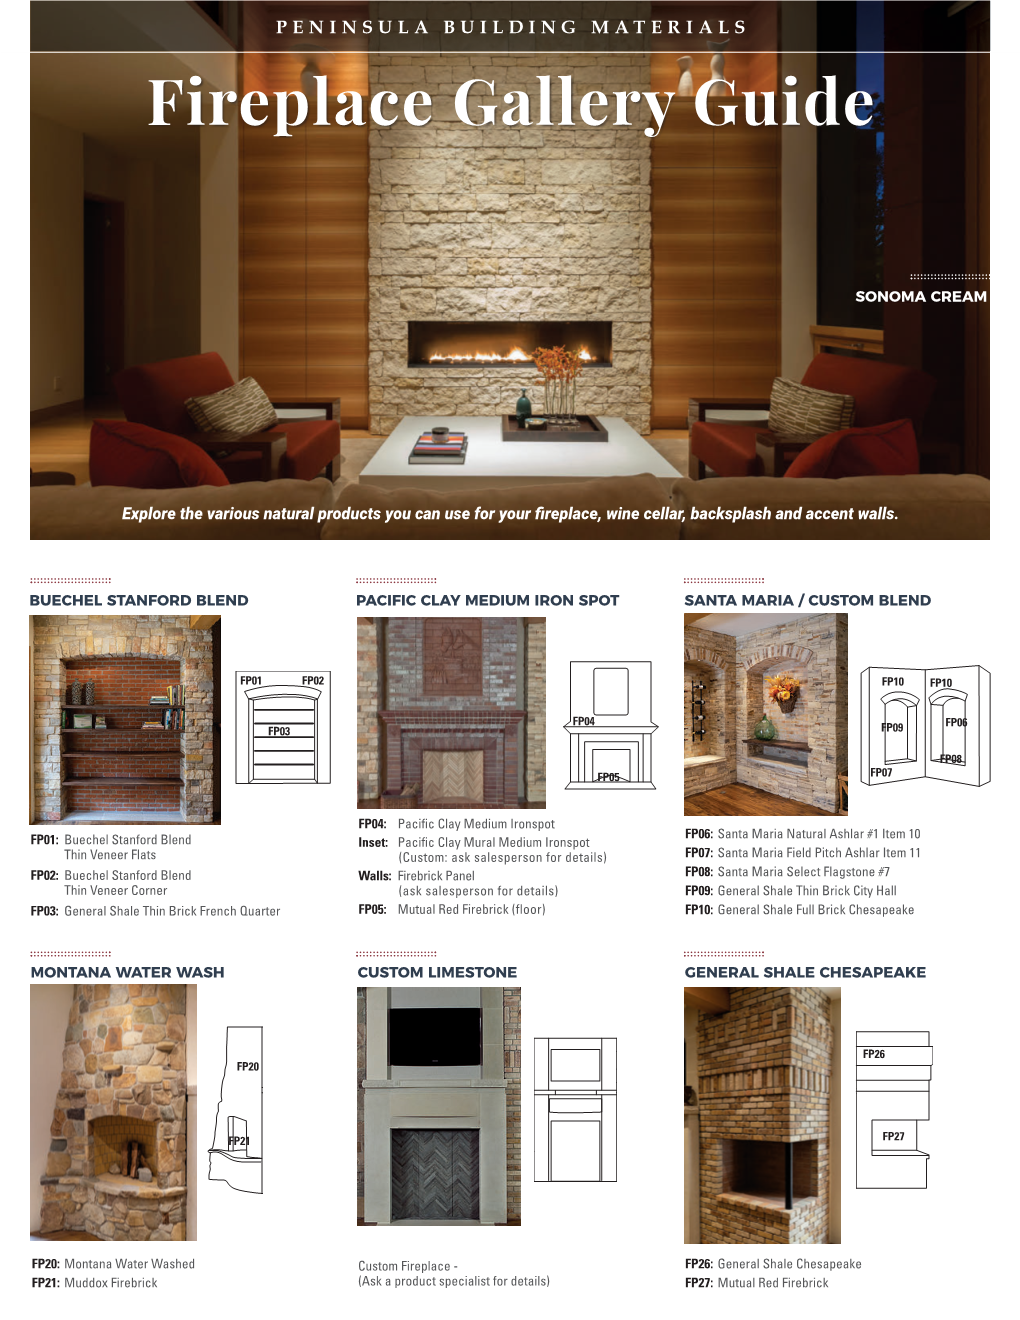 To Download Fireplace Gallery Guide